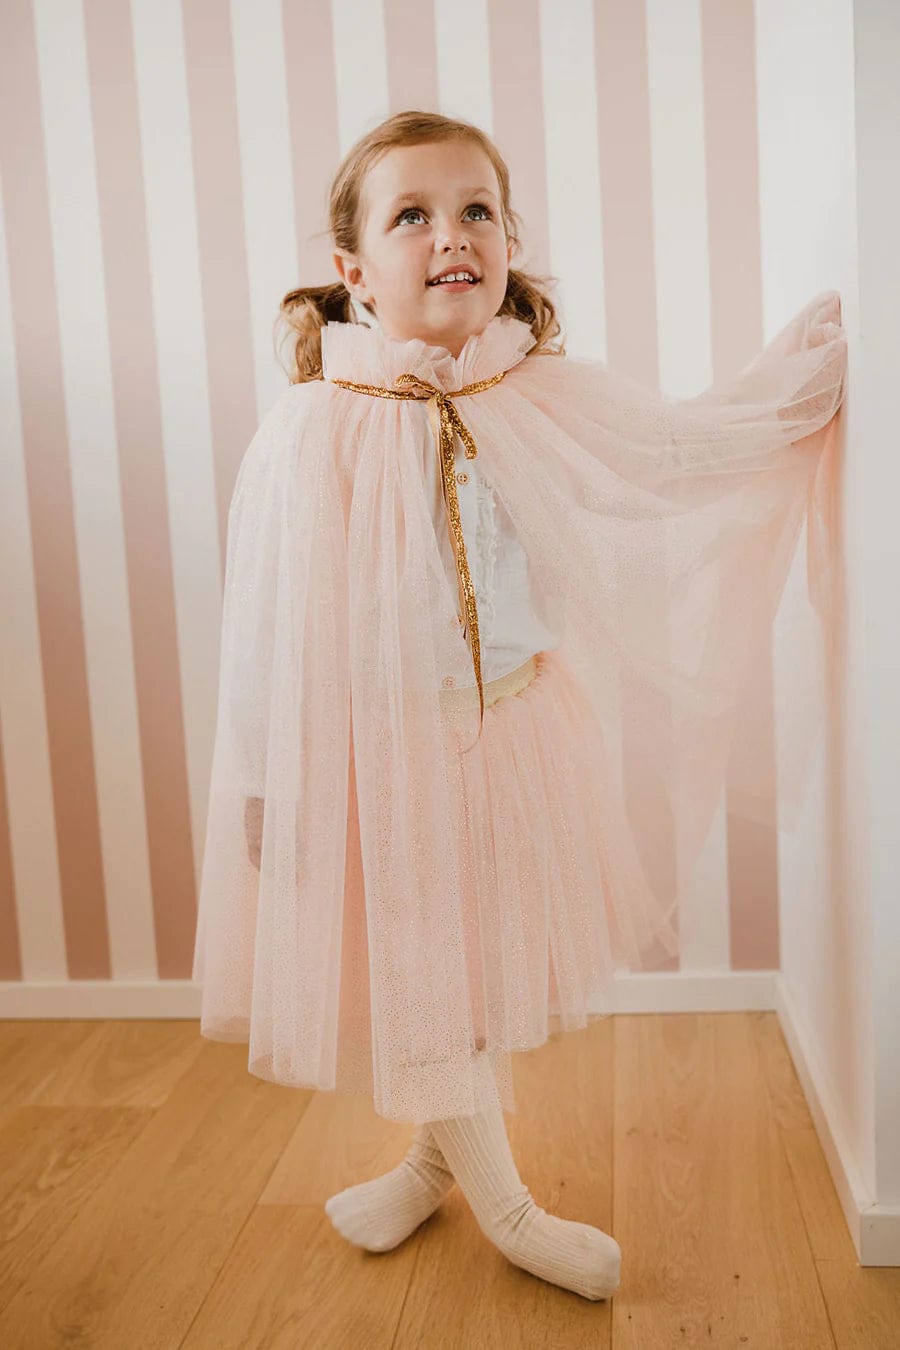 Cape - Soft pink with gold polka dots by Luciole et Petit Pois